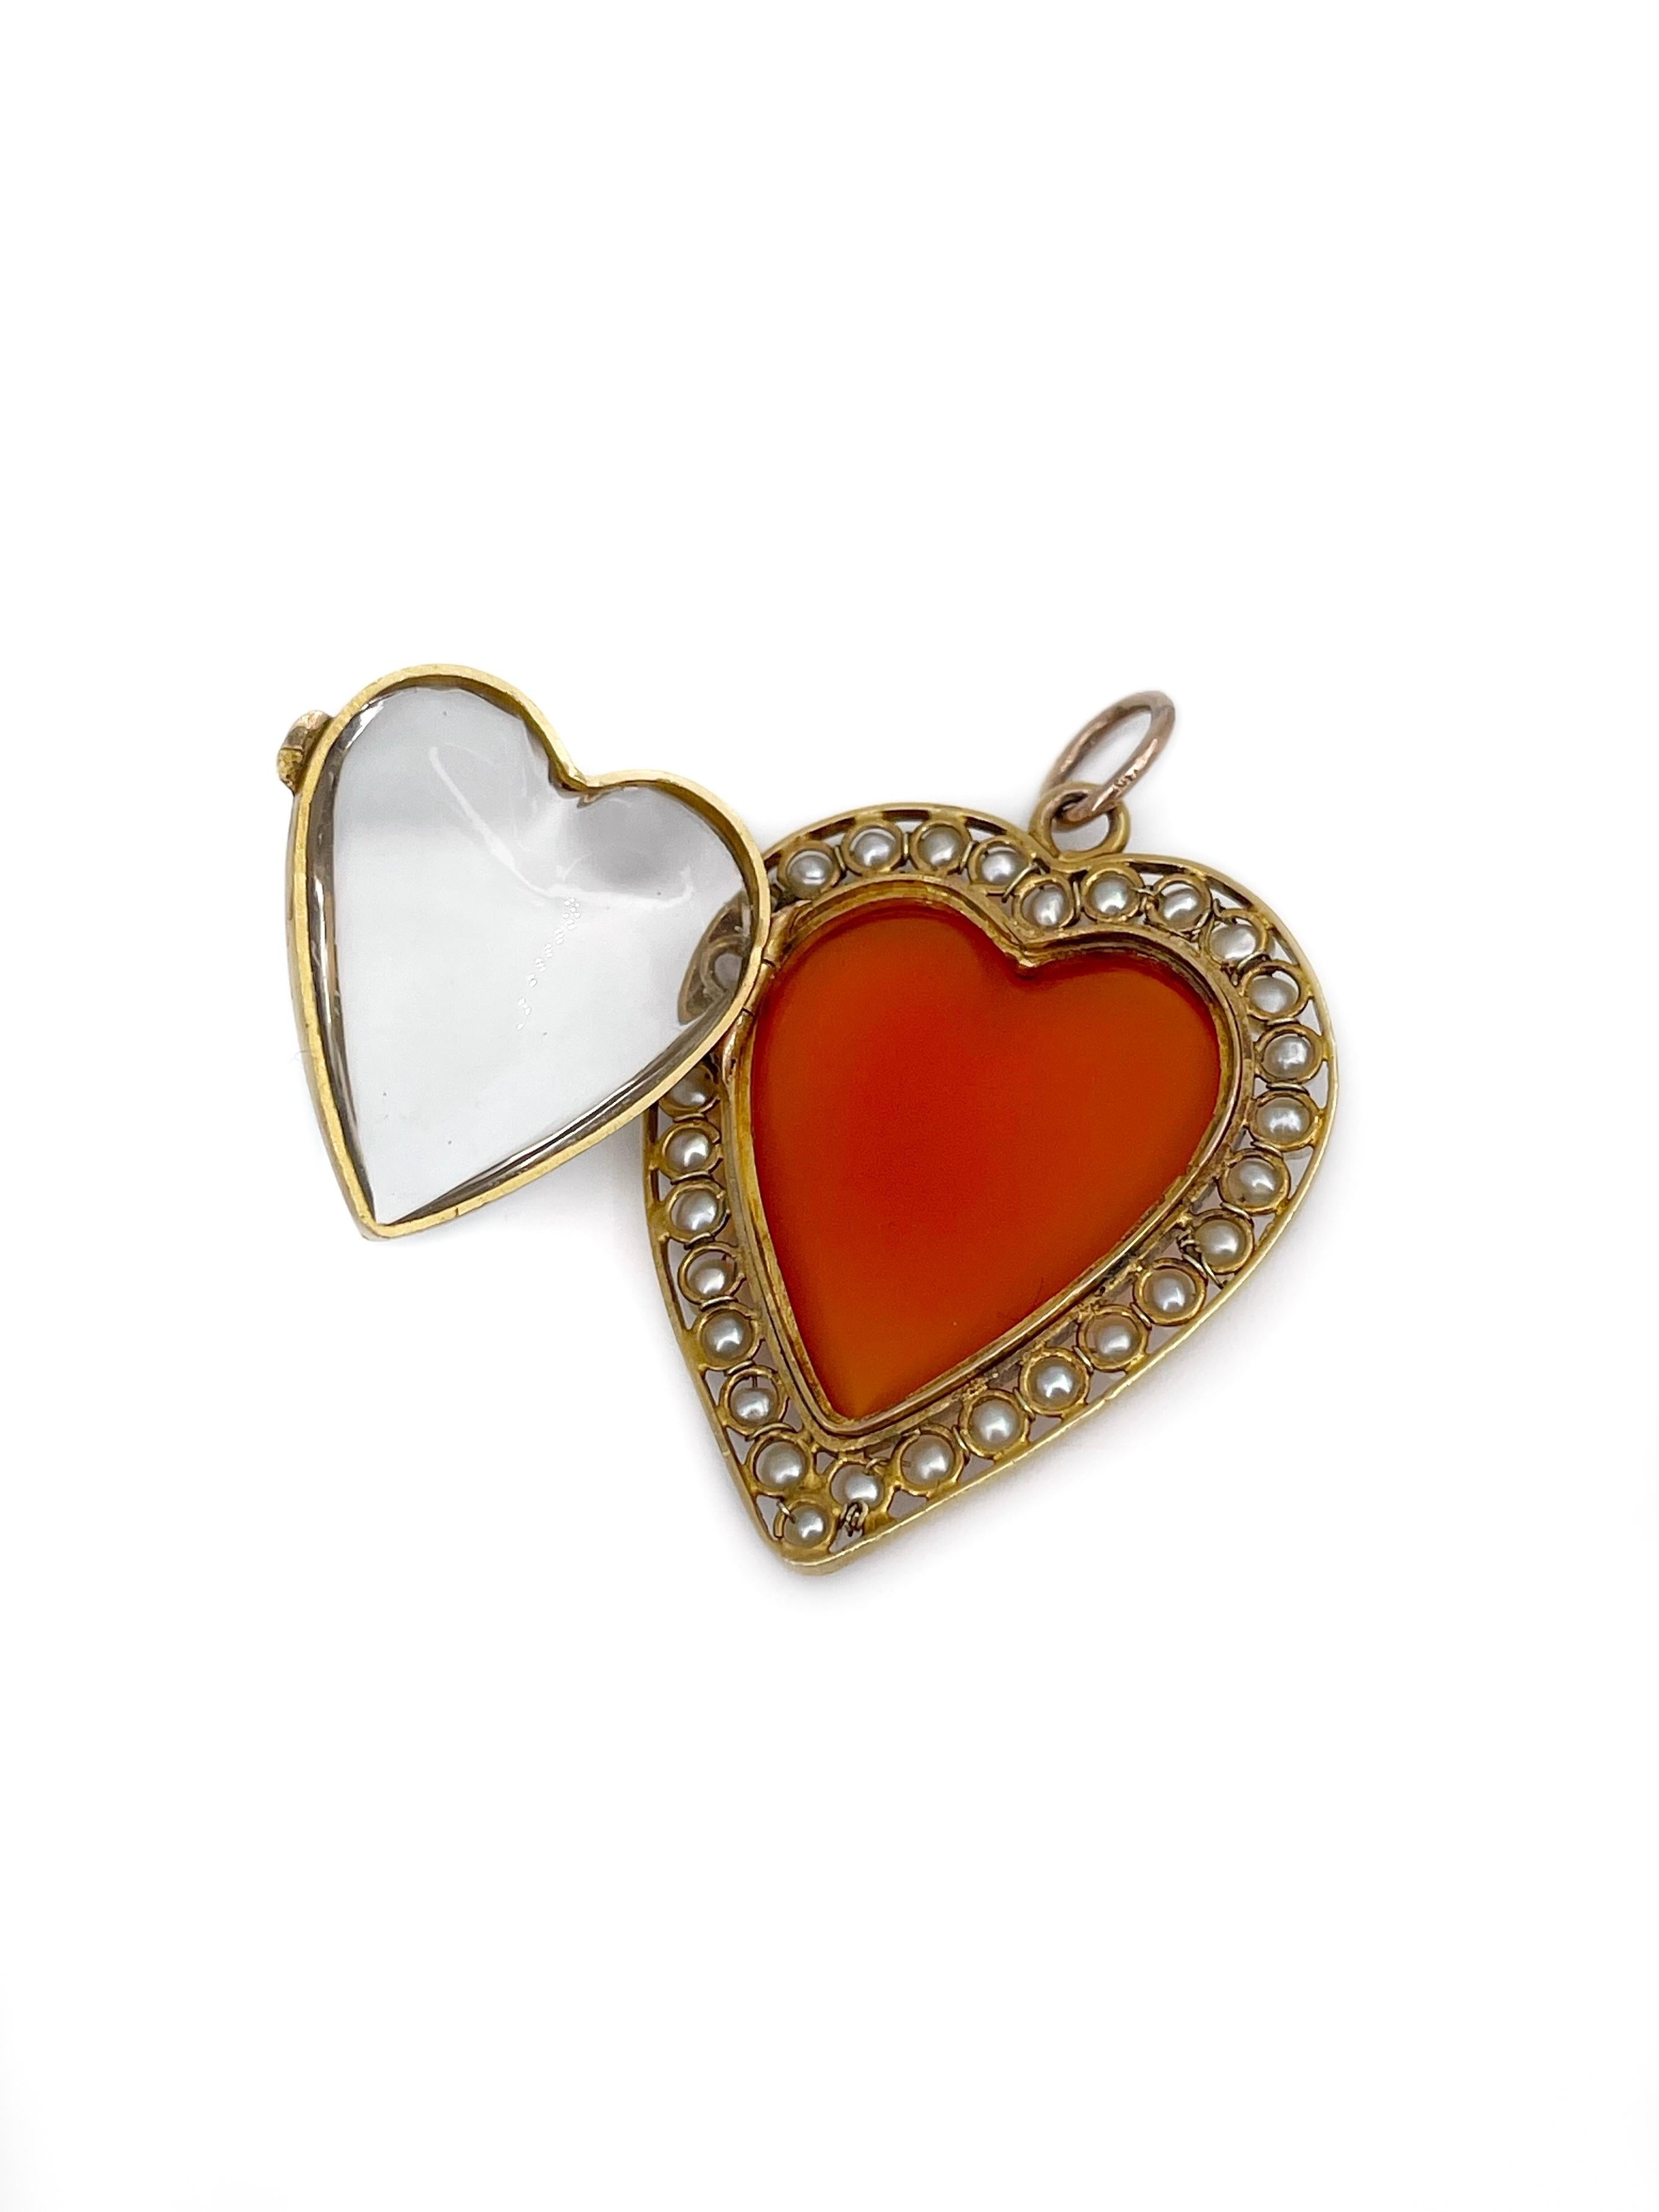 This is a magnificent Victorian heart locket pendant crafted in 14K yellow gold. The piece features cabochon cut carnelian and is adorned with 30 cultured pearls. It has a glass cover making a space for pictures. 

Weight: 5.17g
Size: